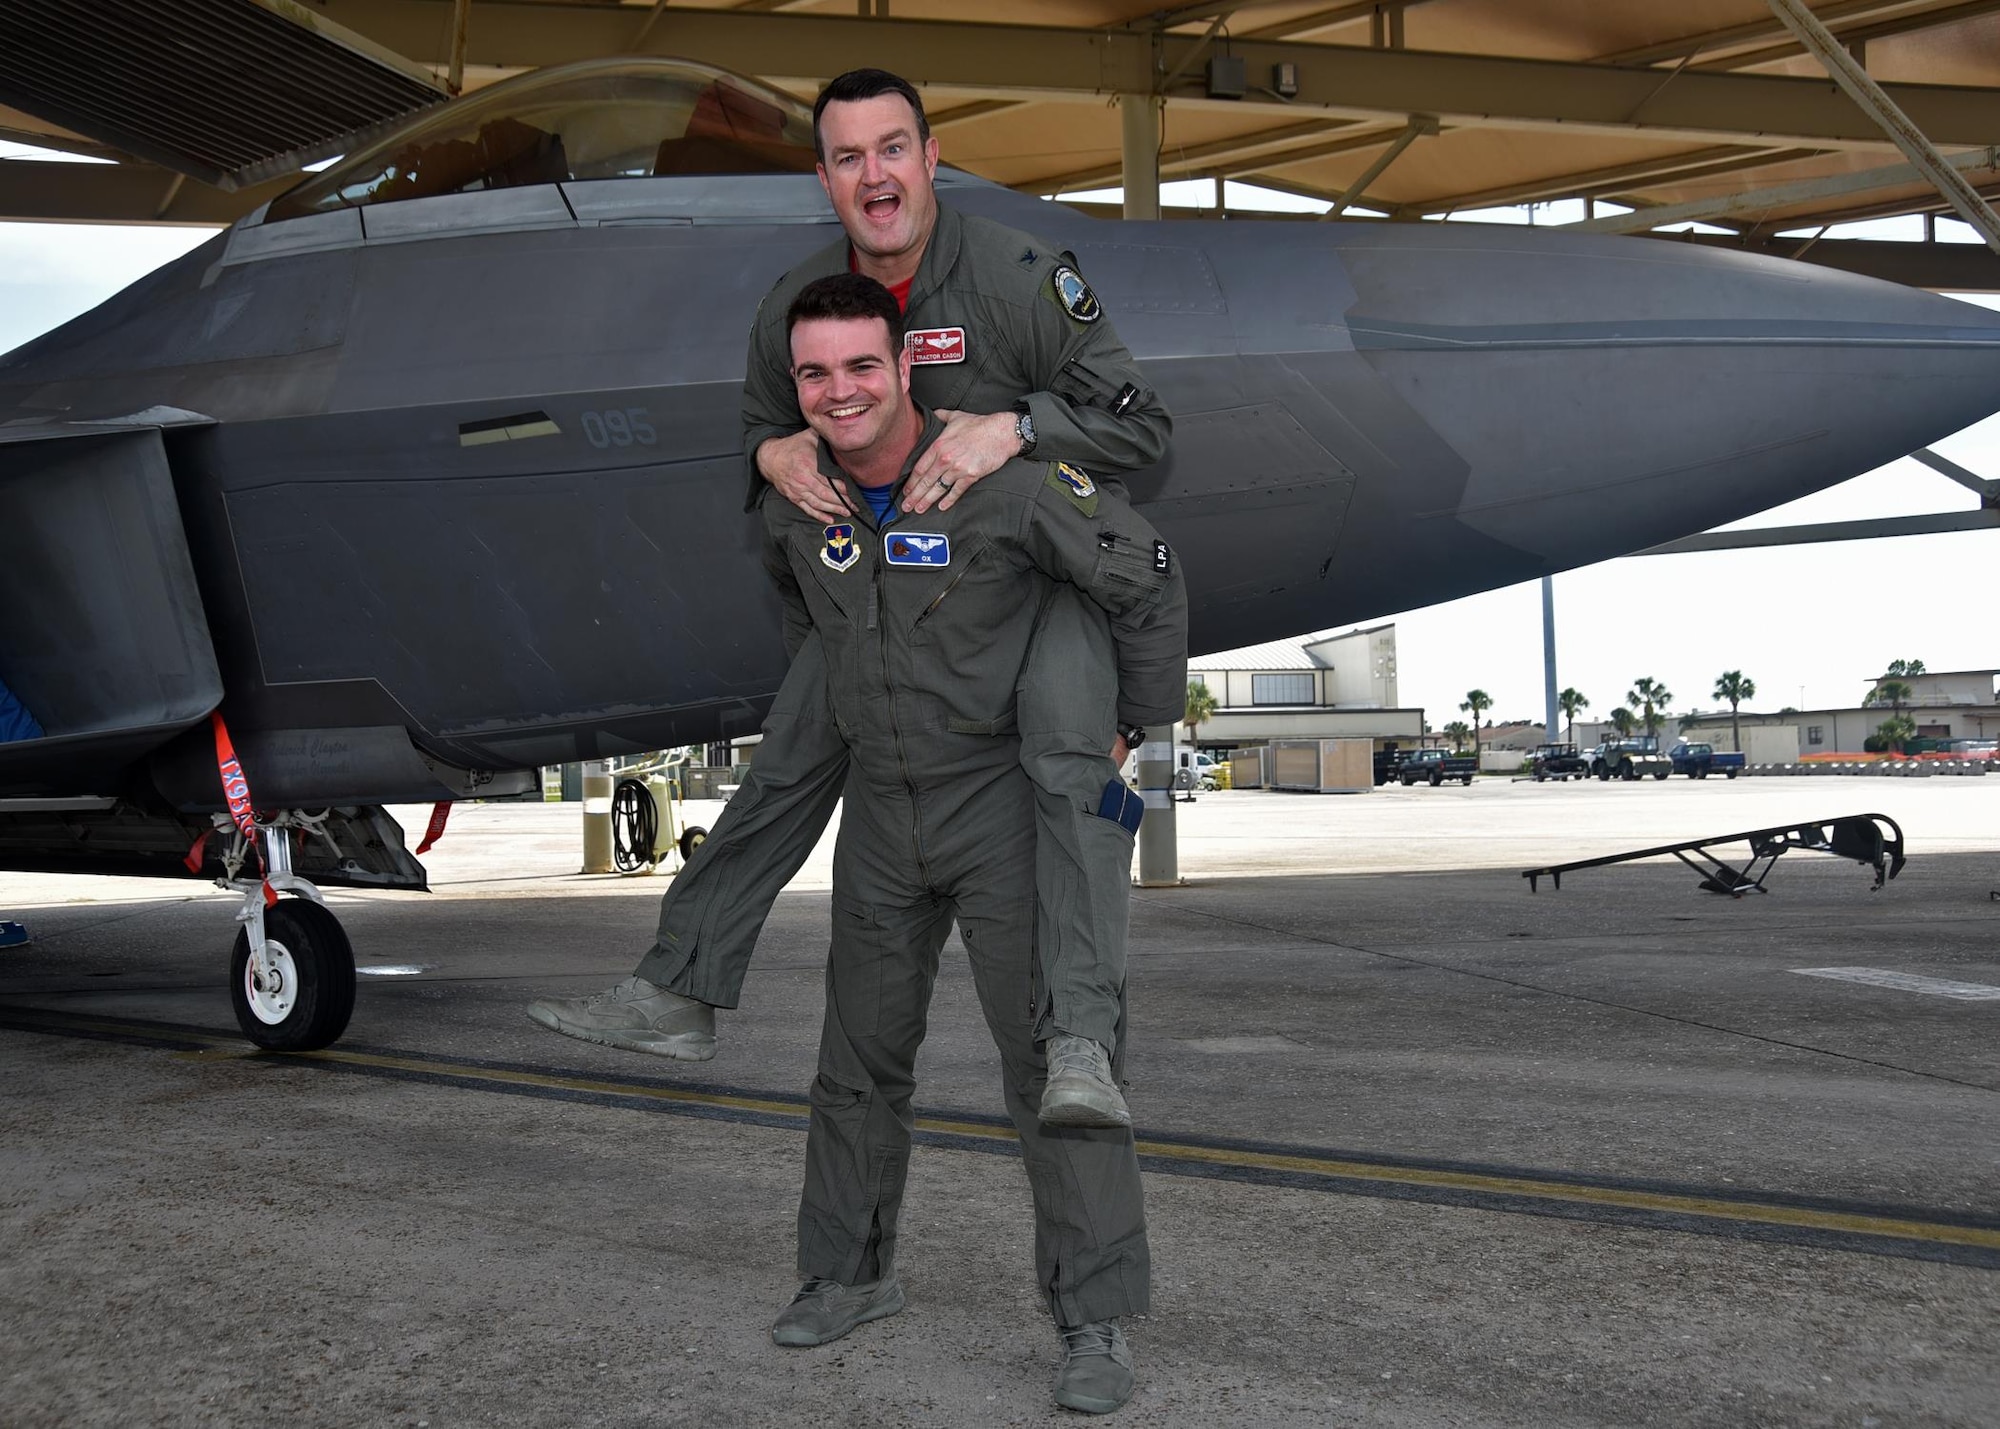 U.S. Air Force Col. Randall W. Cason, 44th Fighter Group commander, and his son 2nd Lt. Randall W. Cason III, 337th Air Control Squadron Air Battle Manager, share a special moment in front of an F-22 Raptor at the Tyndall Air Force Base, Fla., flightline June 16, 2017. As an Air Battle Manager, 2nd Lt. Cason provides command and control to aircraft during combat operations and had the opportunity to support his father during a training mission over the Gulf Coast waters. (U.S. Air Force photo by Senior Airman Sergio A. Gamboa/Released)